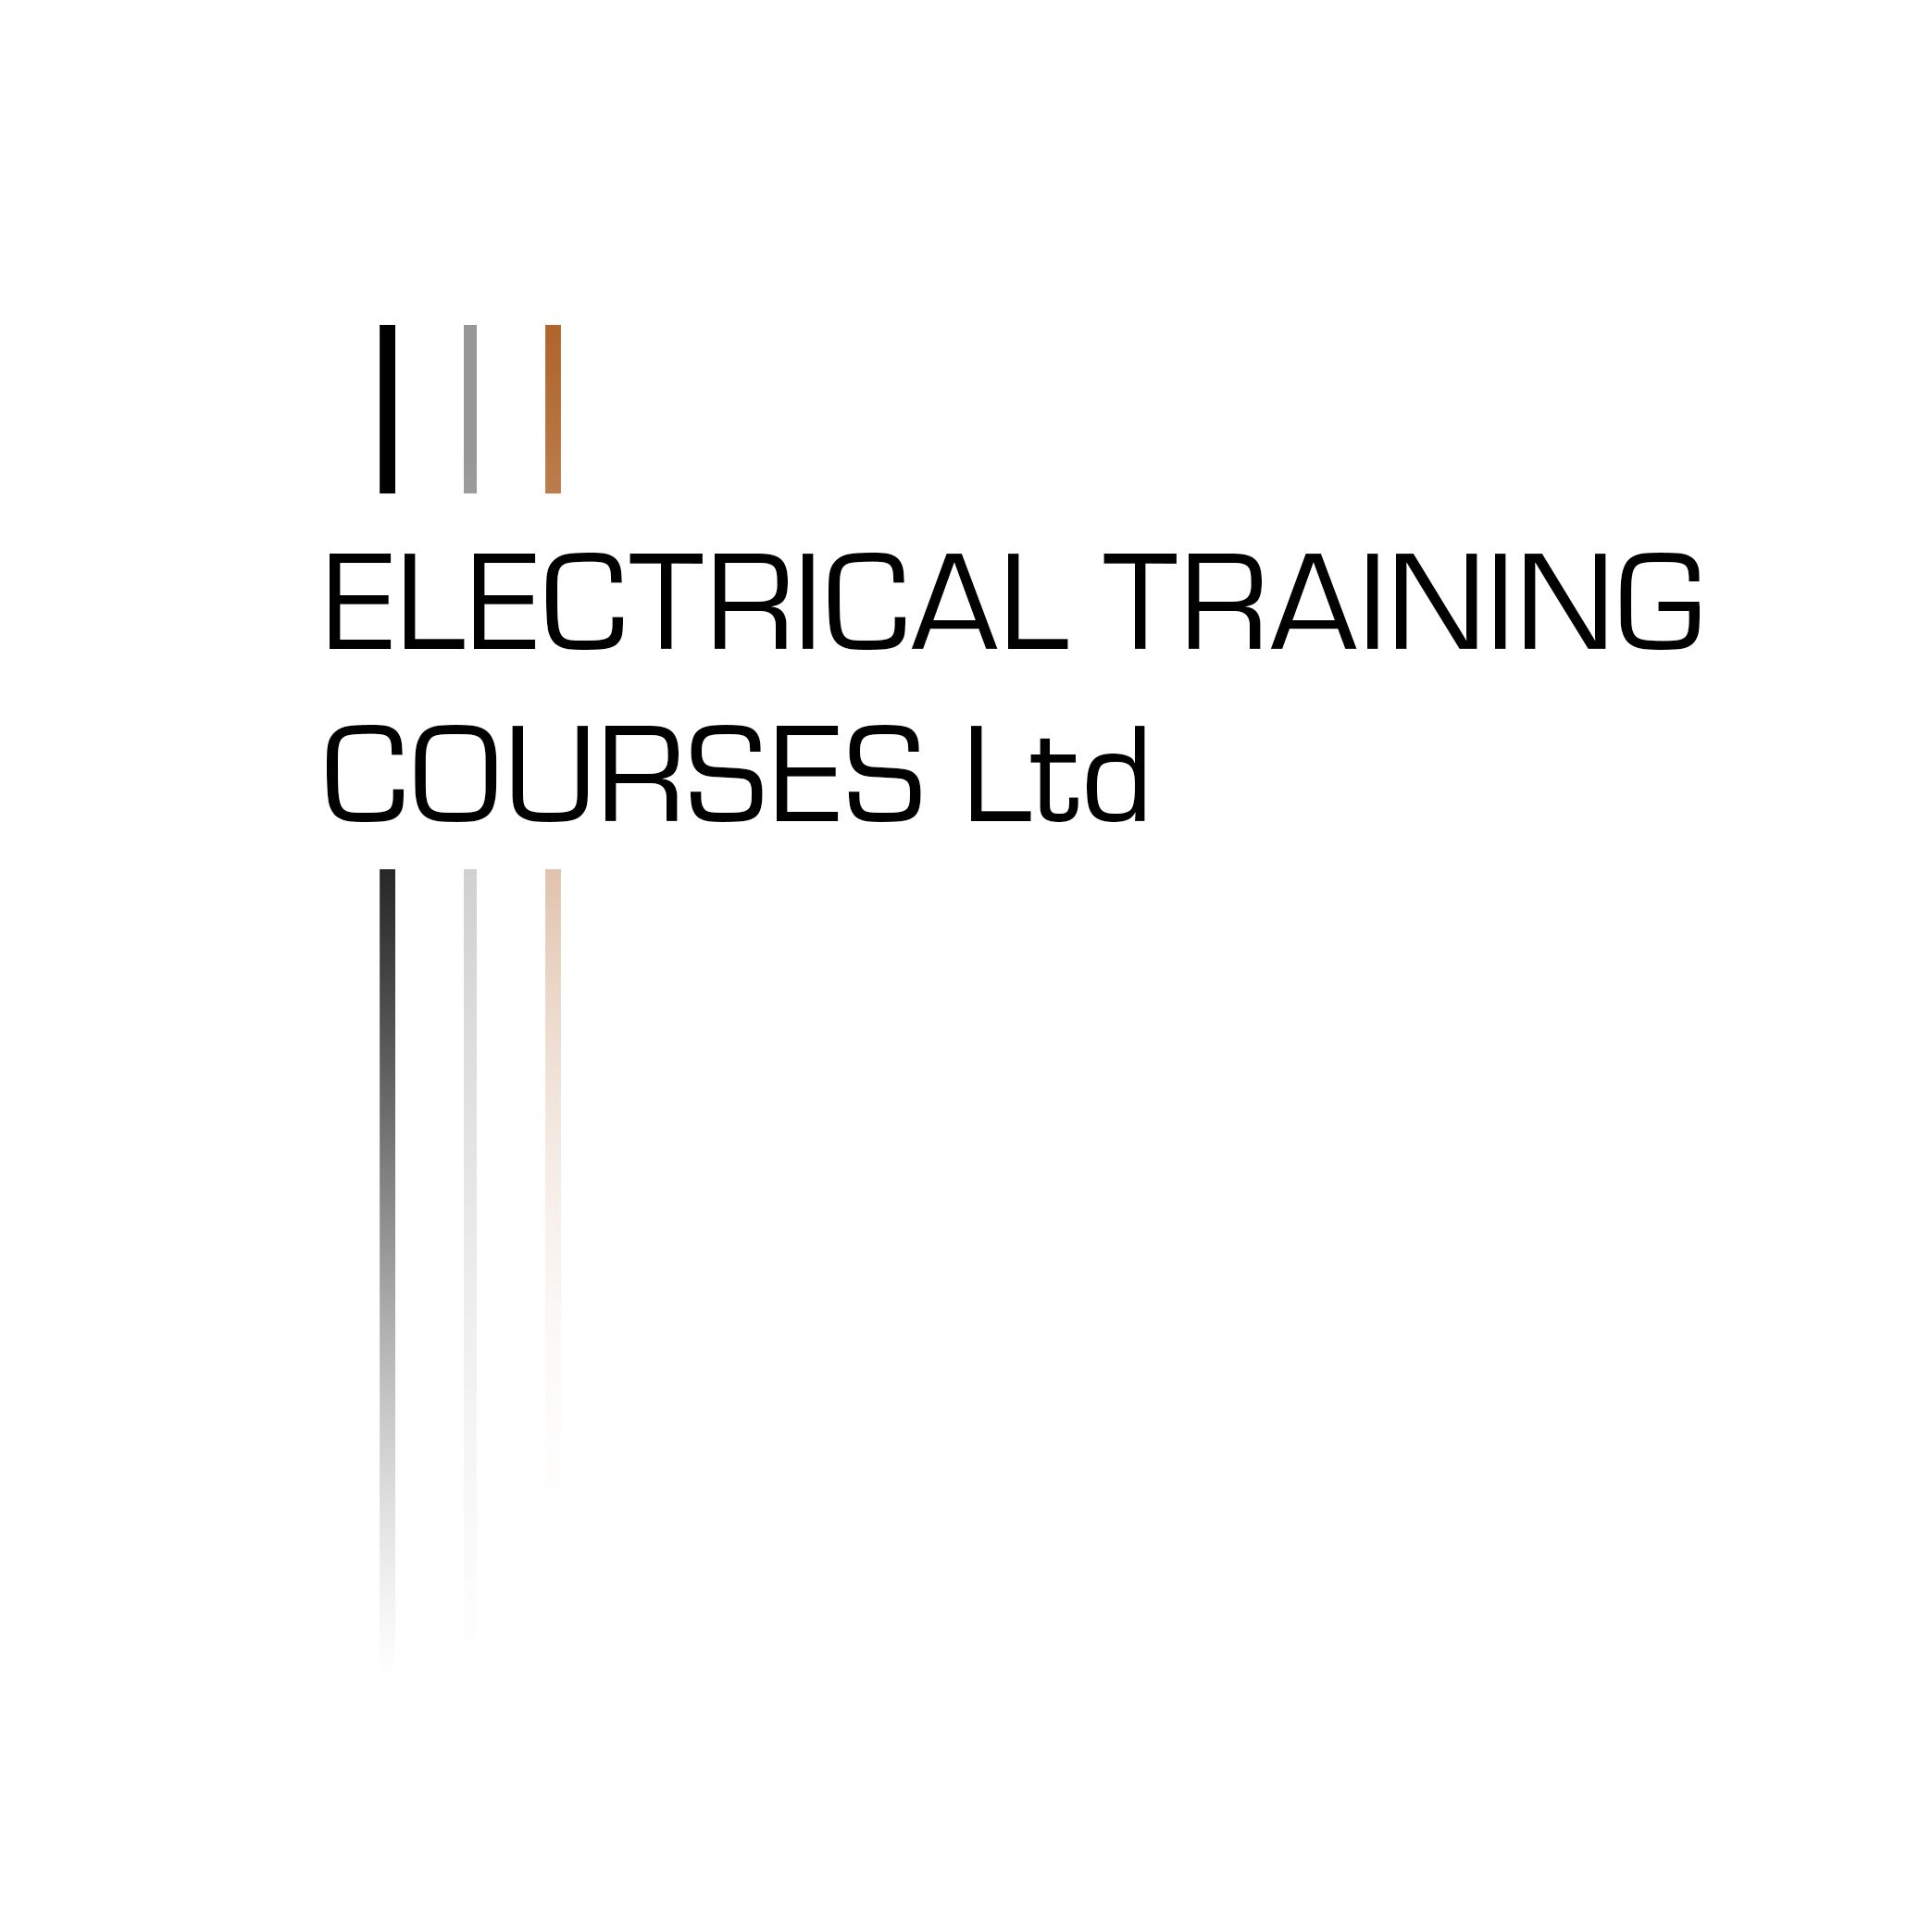 Electrical engineering online courses learned at your own pace with practical assessments and exams booked at a time to suit you.